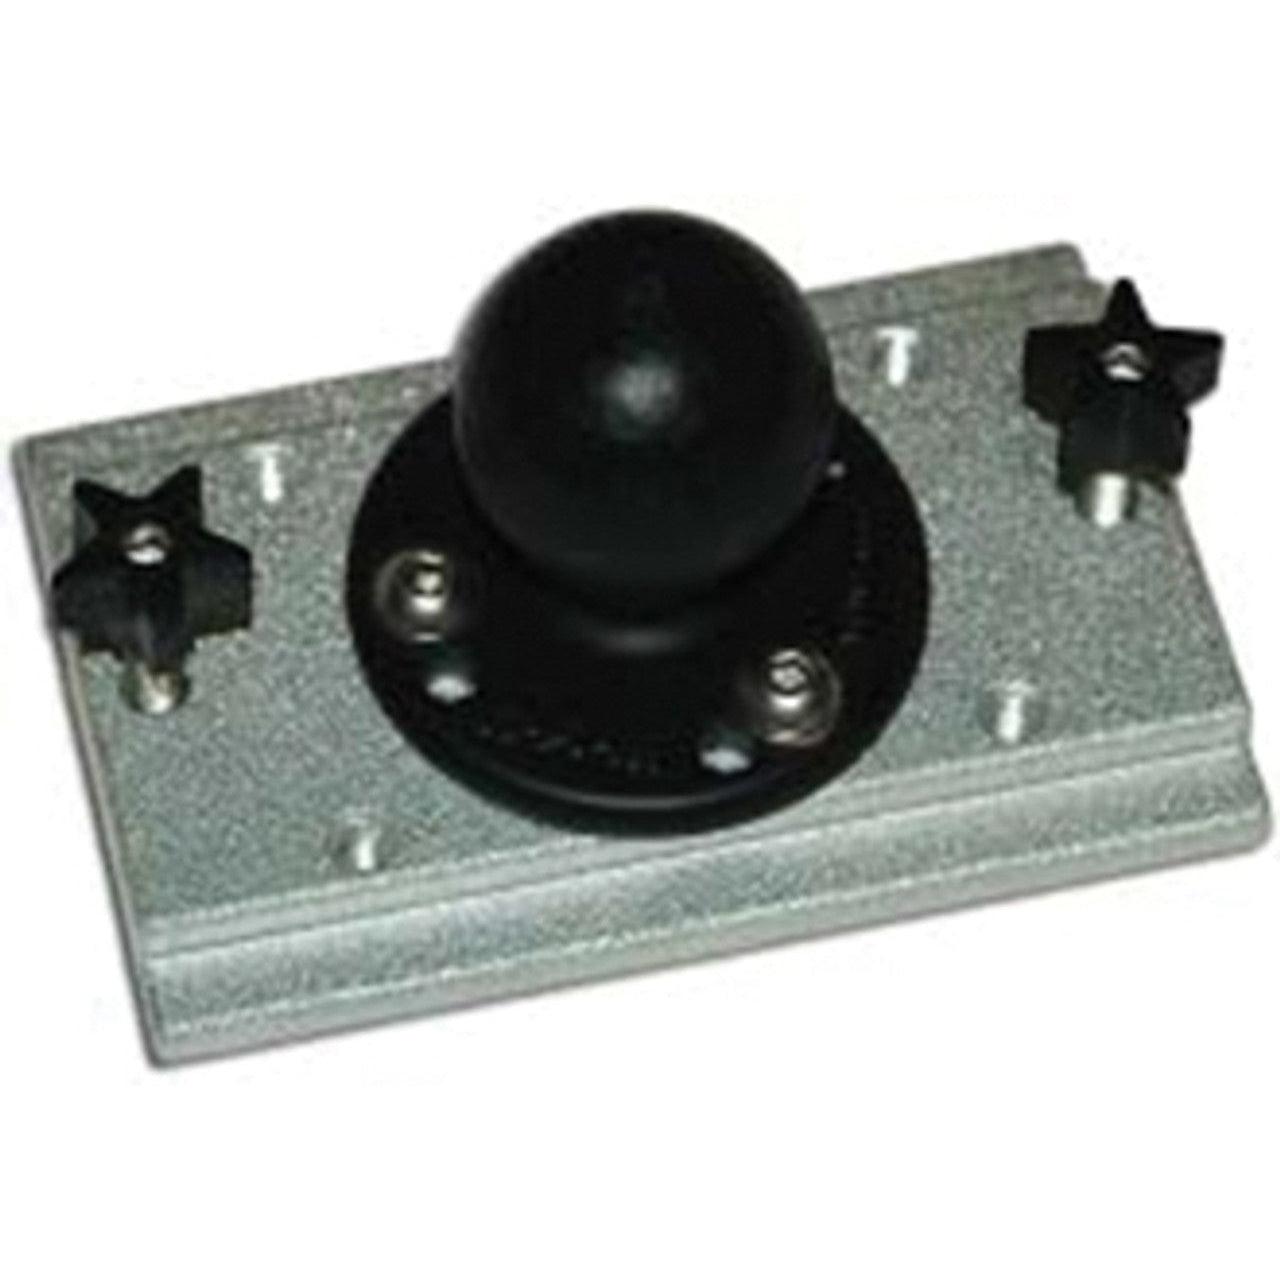 View of boating_accessories Traxtech Ram Mount Adapter Plate available at EZOKO Pike and Musky Shop